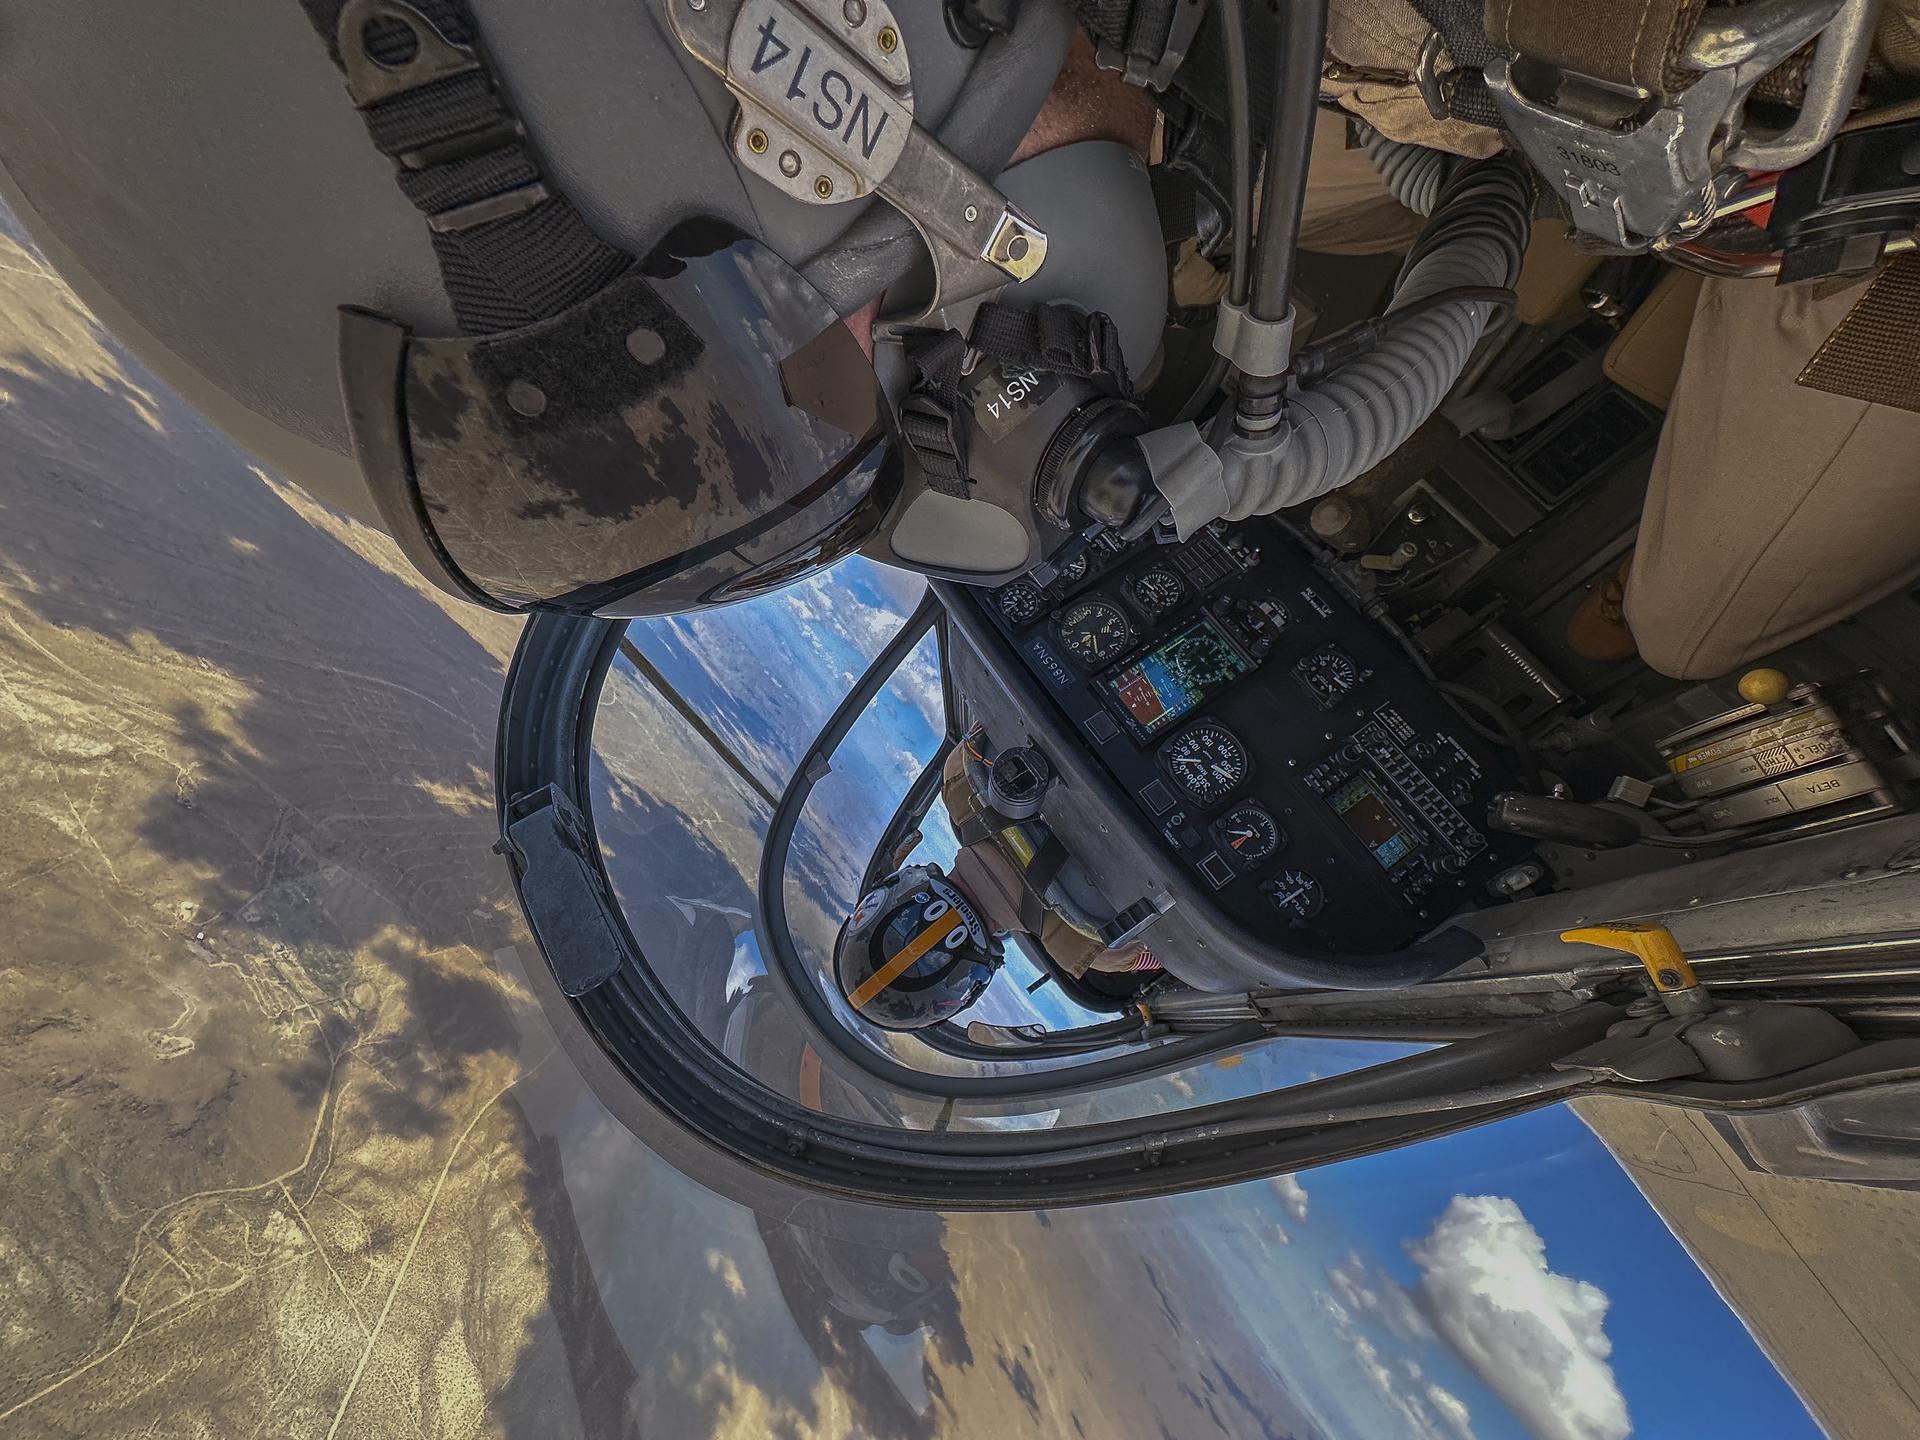 Inside of an aircraft cockpit is shown from the upside down perspective with two men in tan flight suits sitting inside. The side of one helmet, oxygen mask and visor is seen for one of the two men as well as controls inside the aircraft. The second helmet is seen from the back as the man sitting in the front is piloting the aircraft. You can see land below through the window of the aircraft. 